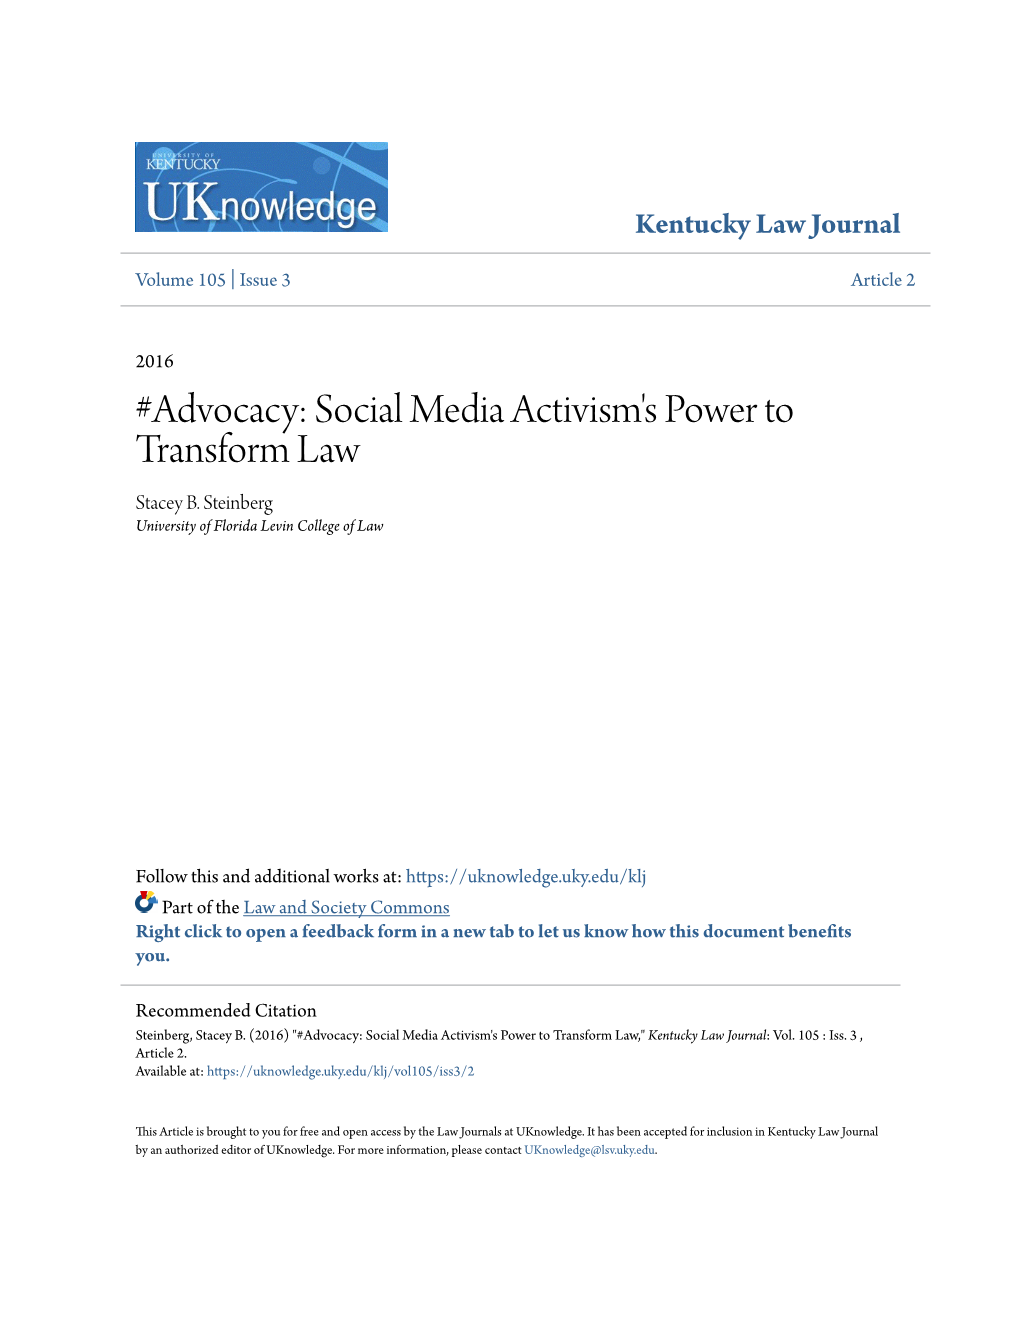 Advocacy: Social Media Activism's Power to Transform Law Stacey B